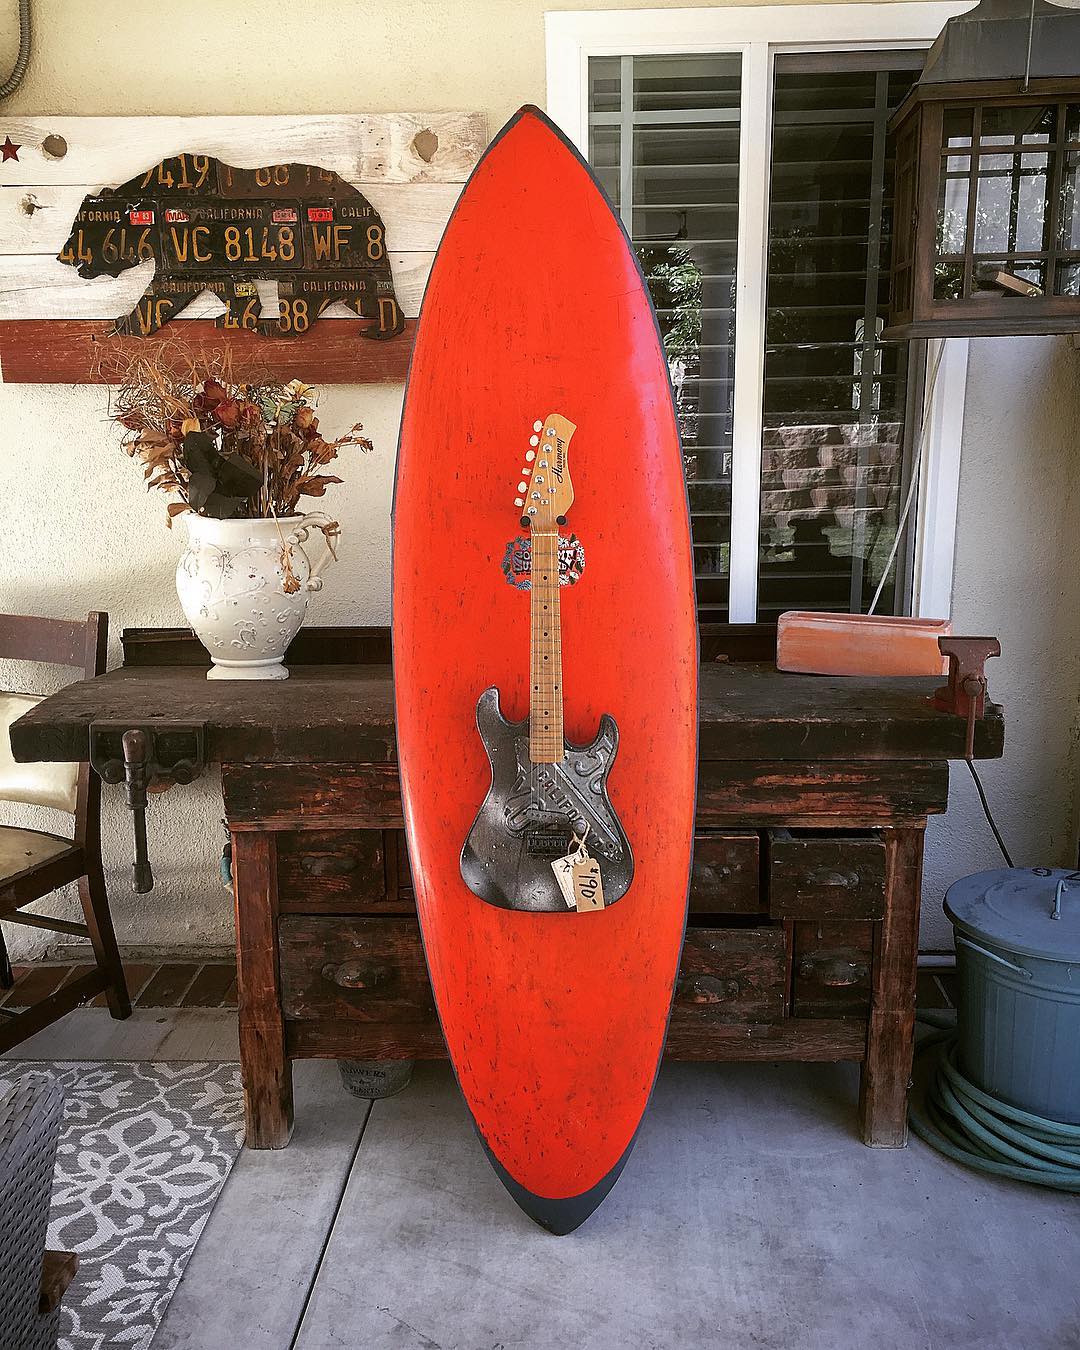 Removable working electric guitar mounted on a vintage surfboard makes a great wall hanger for the beach-house